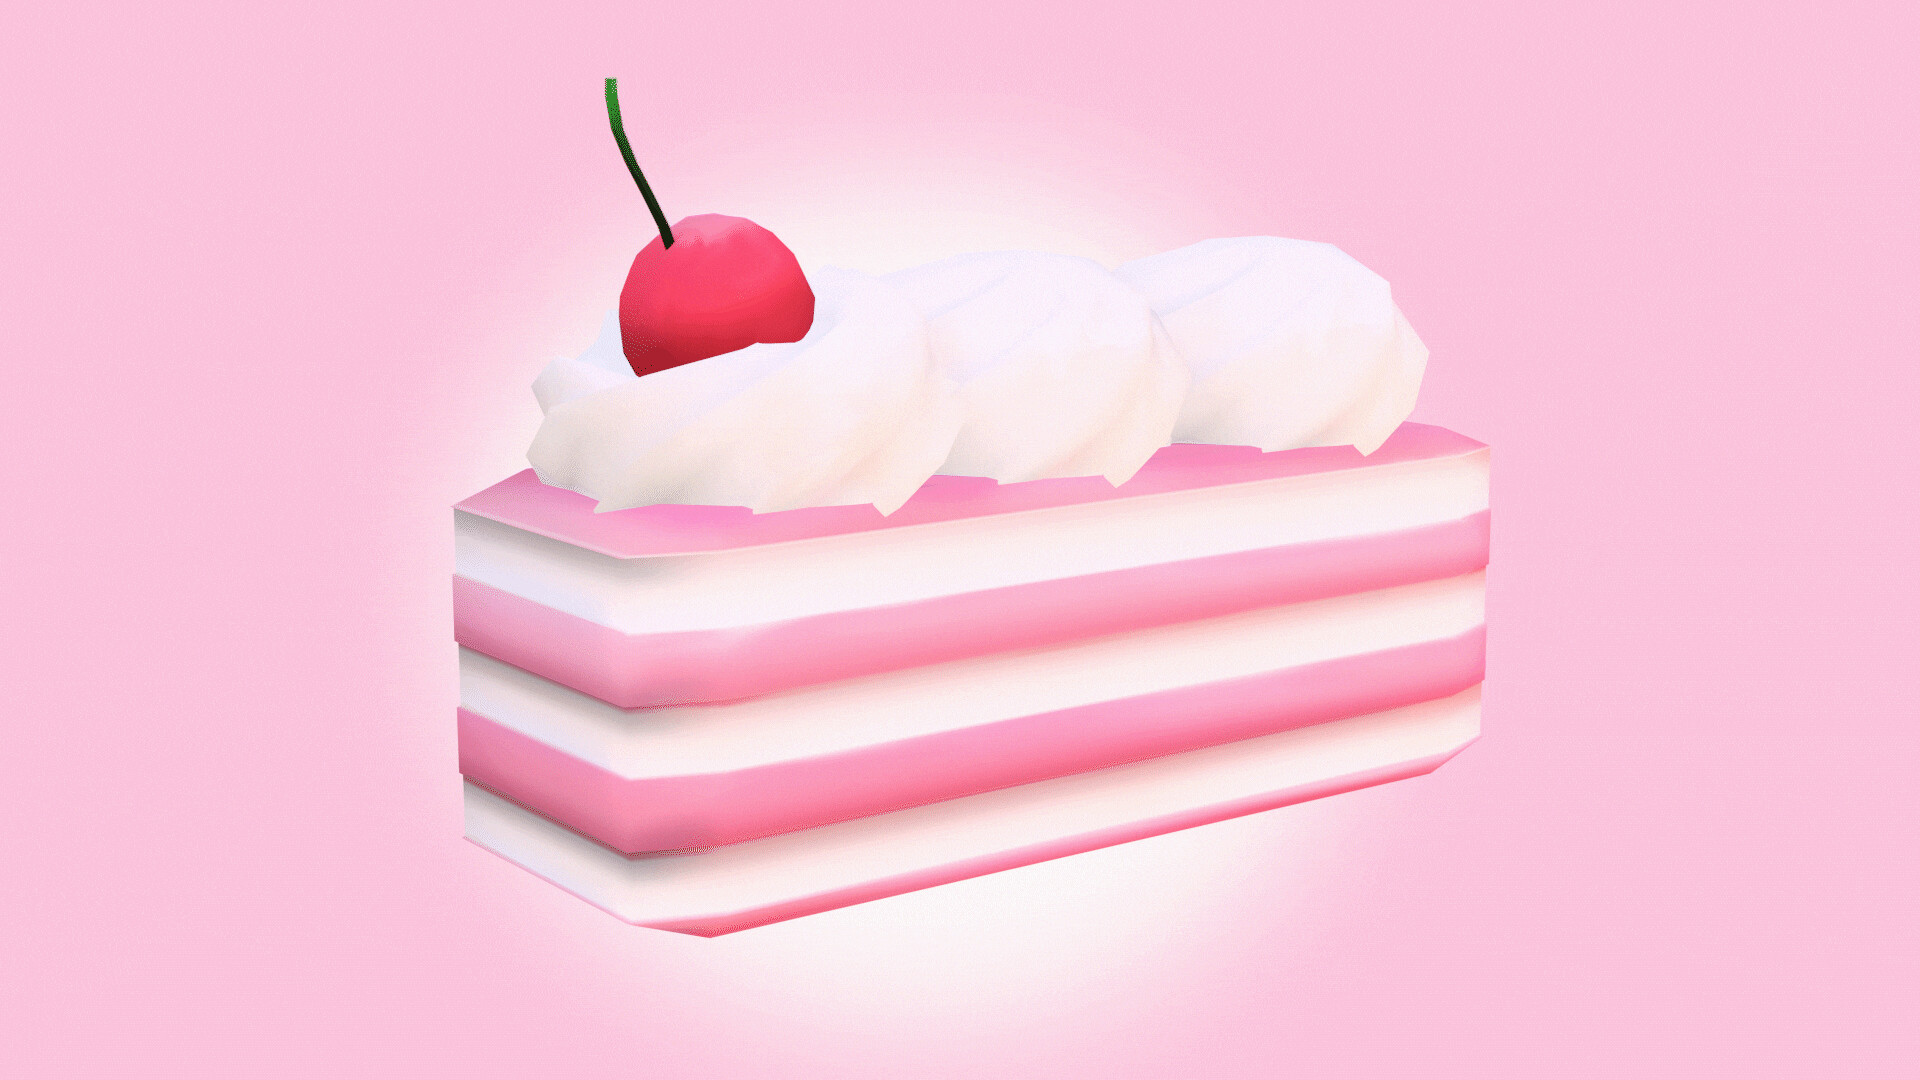 Roblox ❤️ (Soft icing) - Cherrie's Pastries